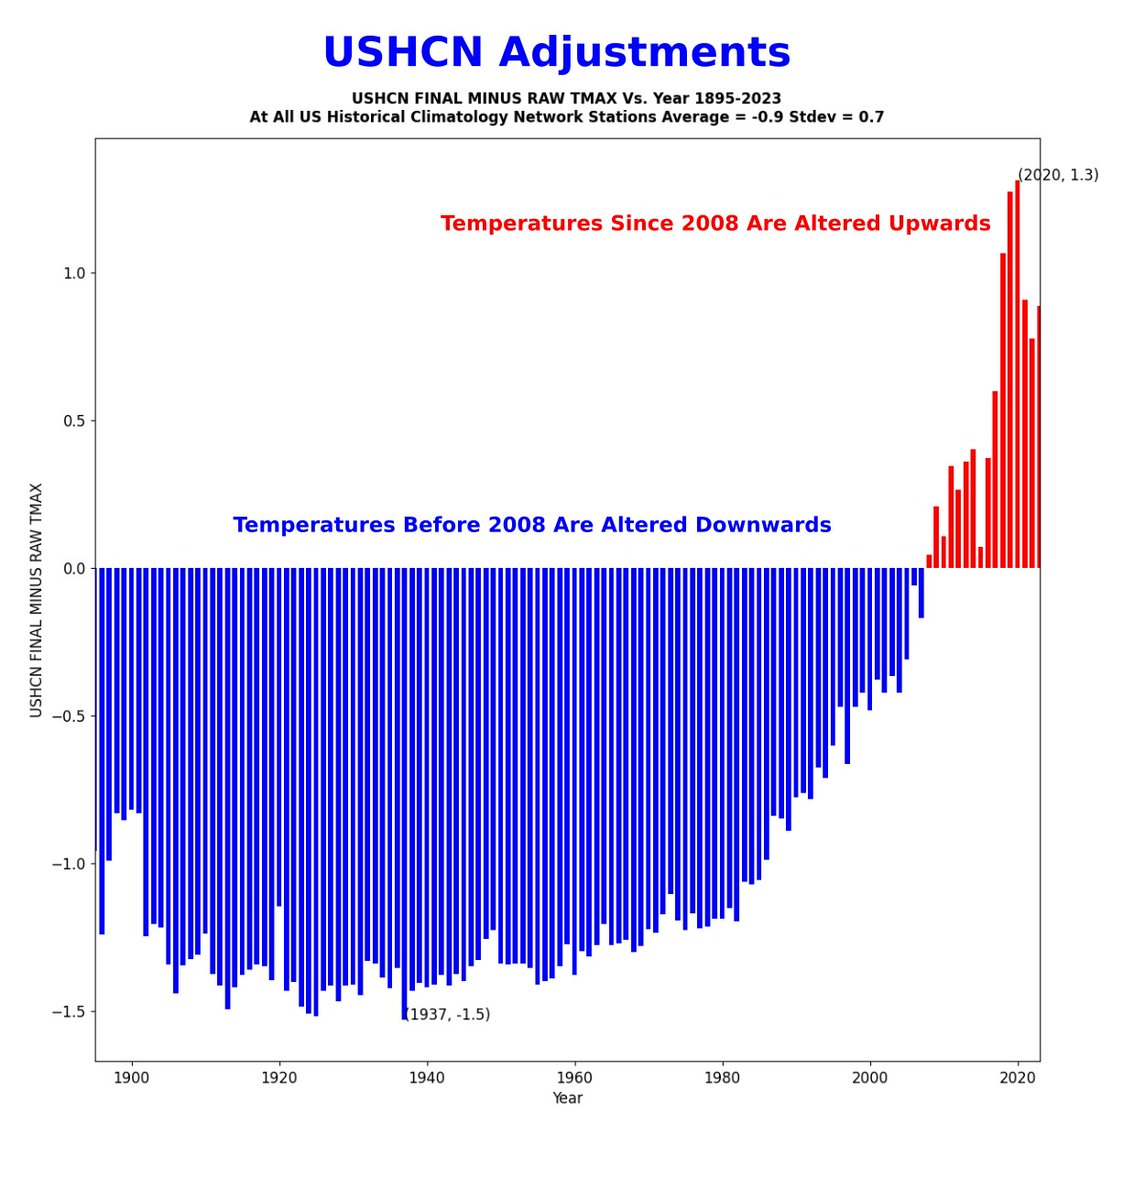 Almost 50% of the official US temperature data is now fake, and the rest is massively tampered with. The entire climate story is a scam from start to finish.